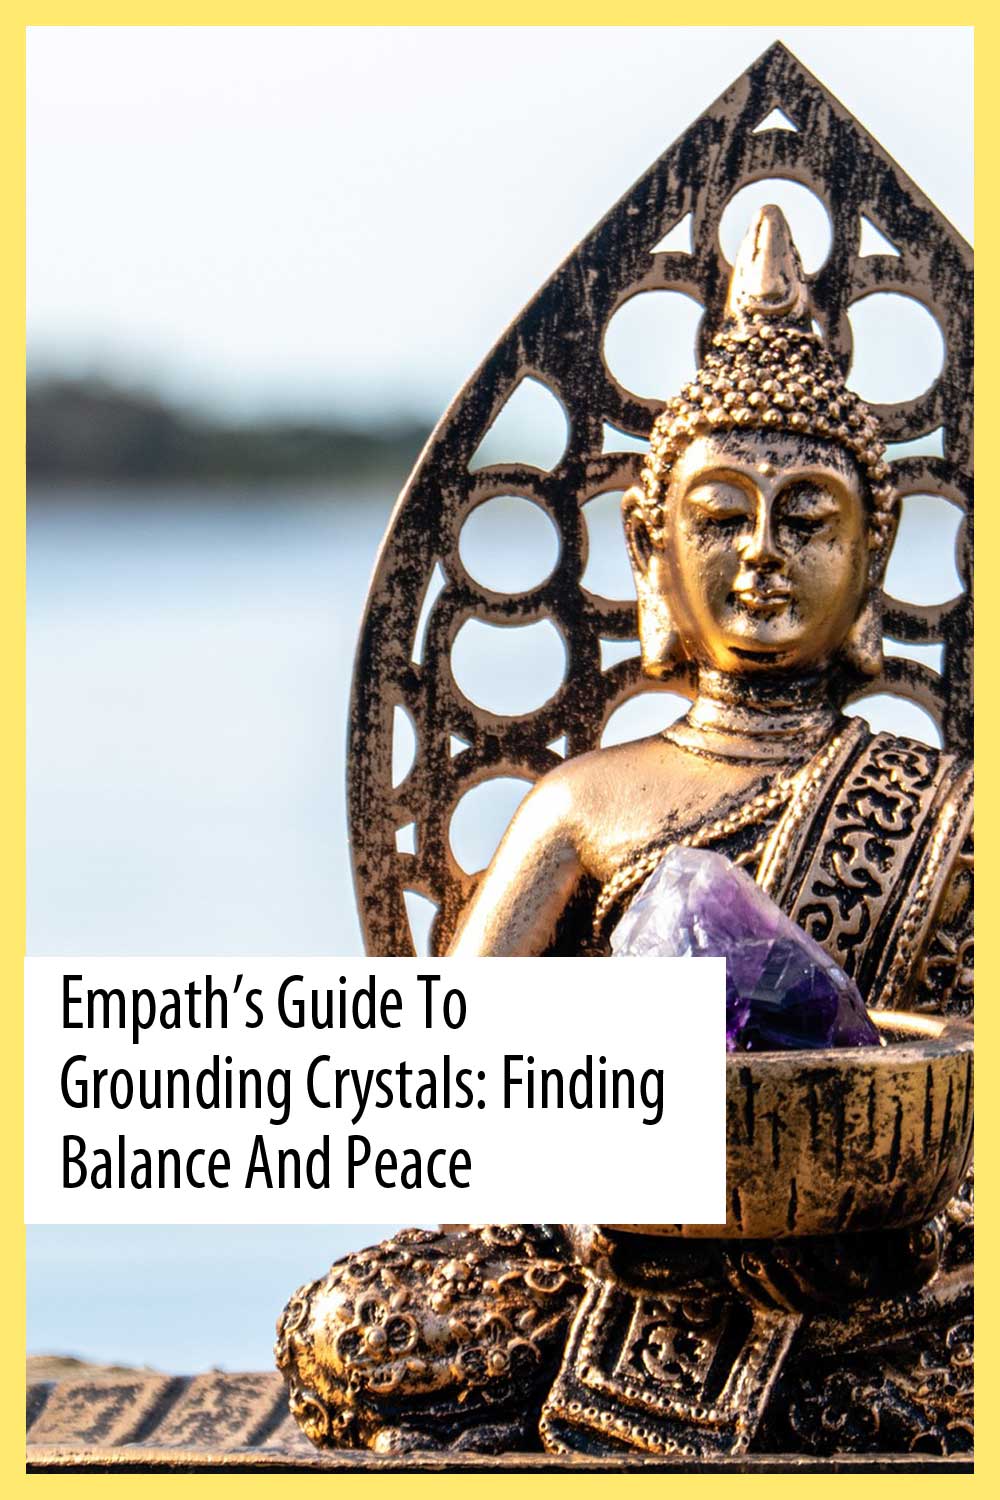 Empath’s Guide to Grounding Crystals: Finding Balance and Peace